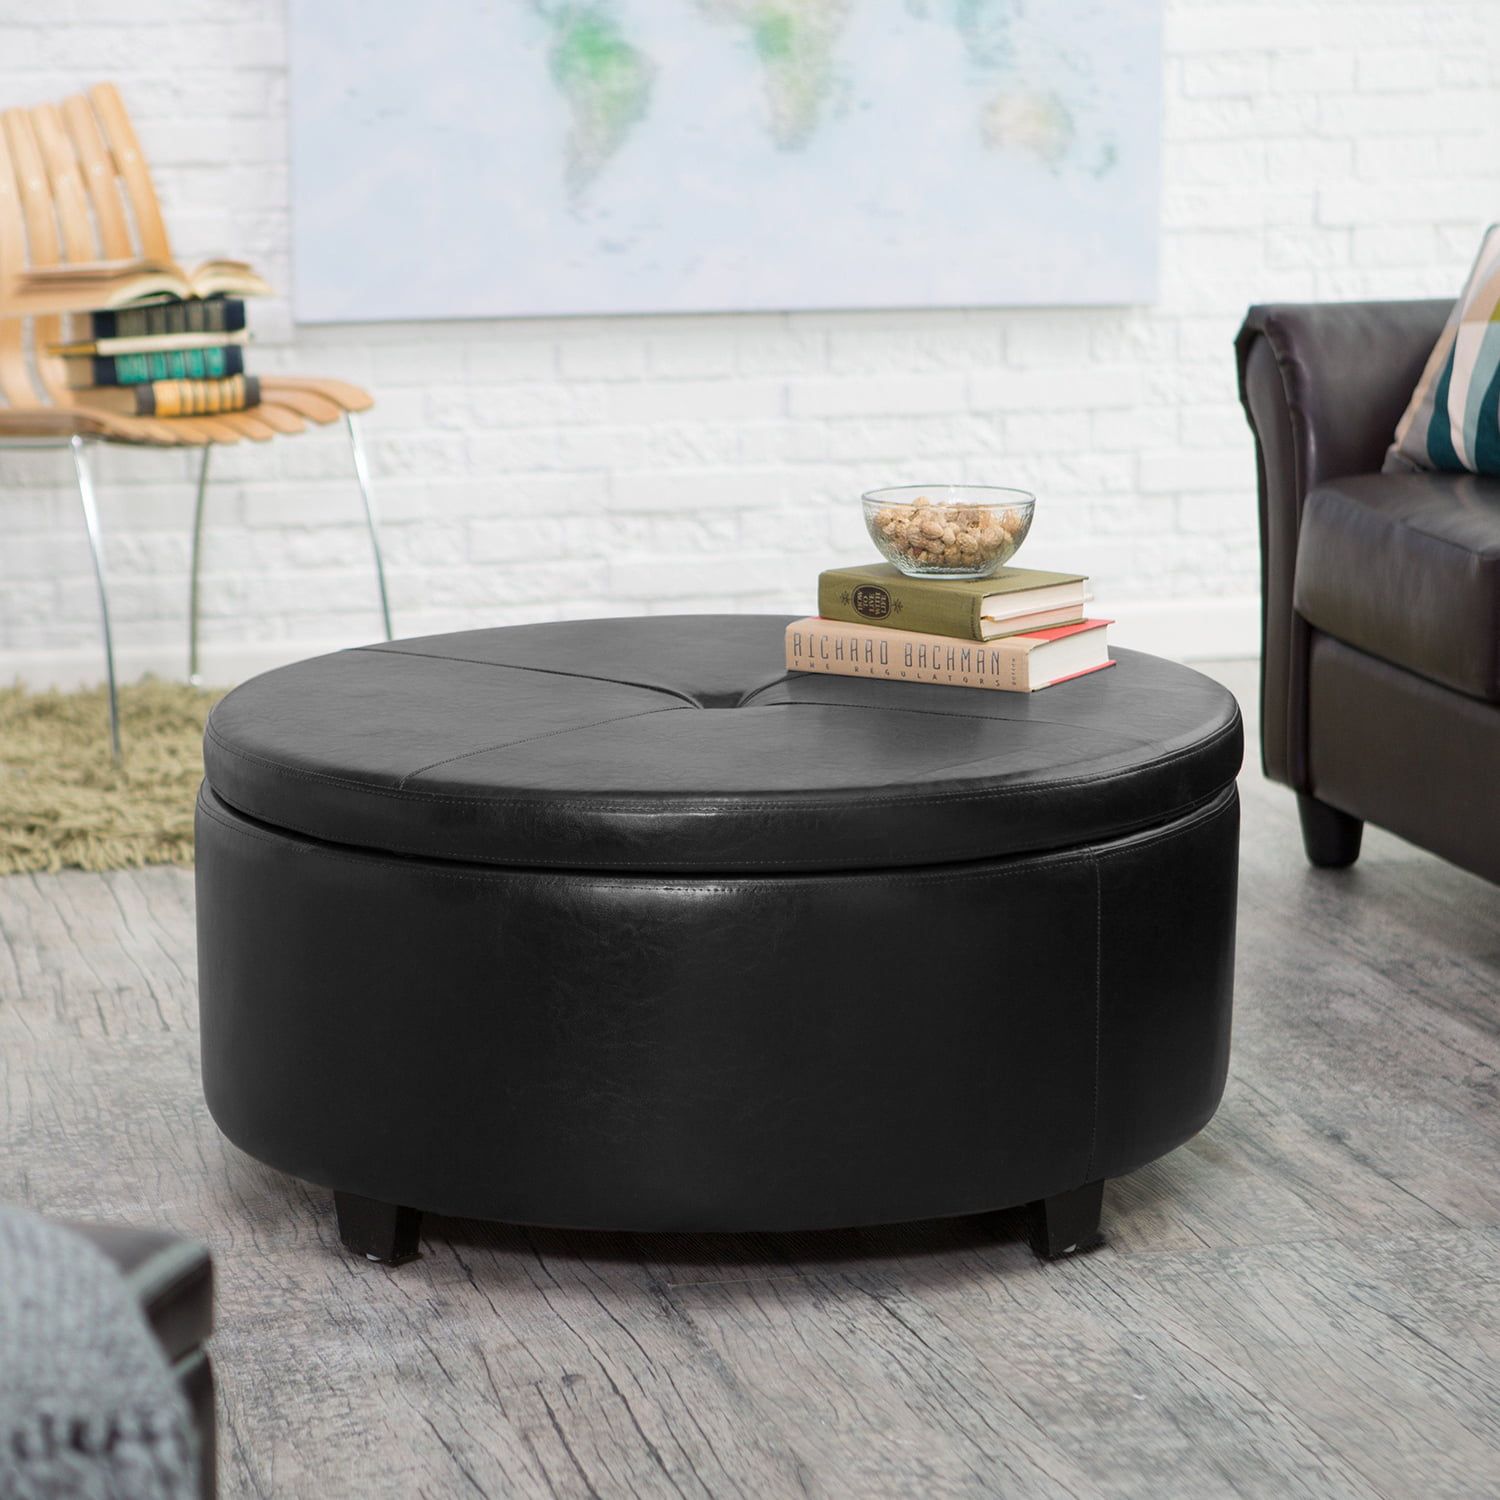 Lacoo Large Round Storage Ottoman Comfort Footrest, Black Faux Leather –  Walmart Inside 36 Inch Round Ottomans (View 12 of 15)